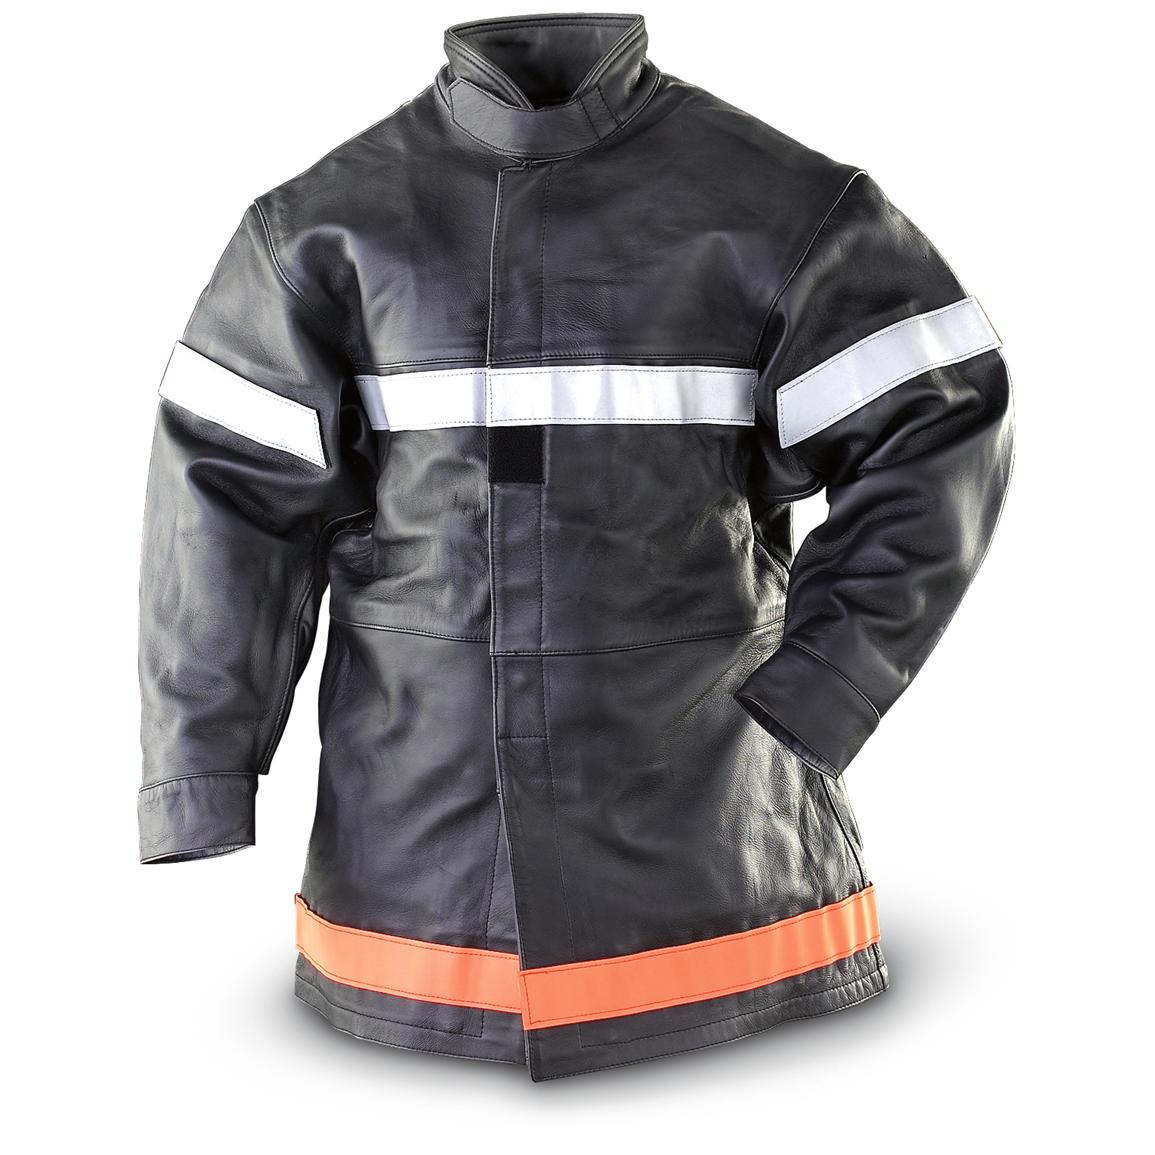 New French-issue Fire Brigade Jacket - 171369, Insulated Jackets